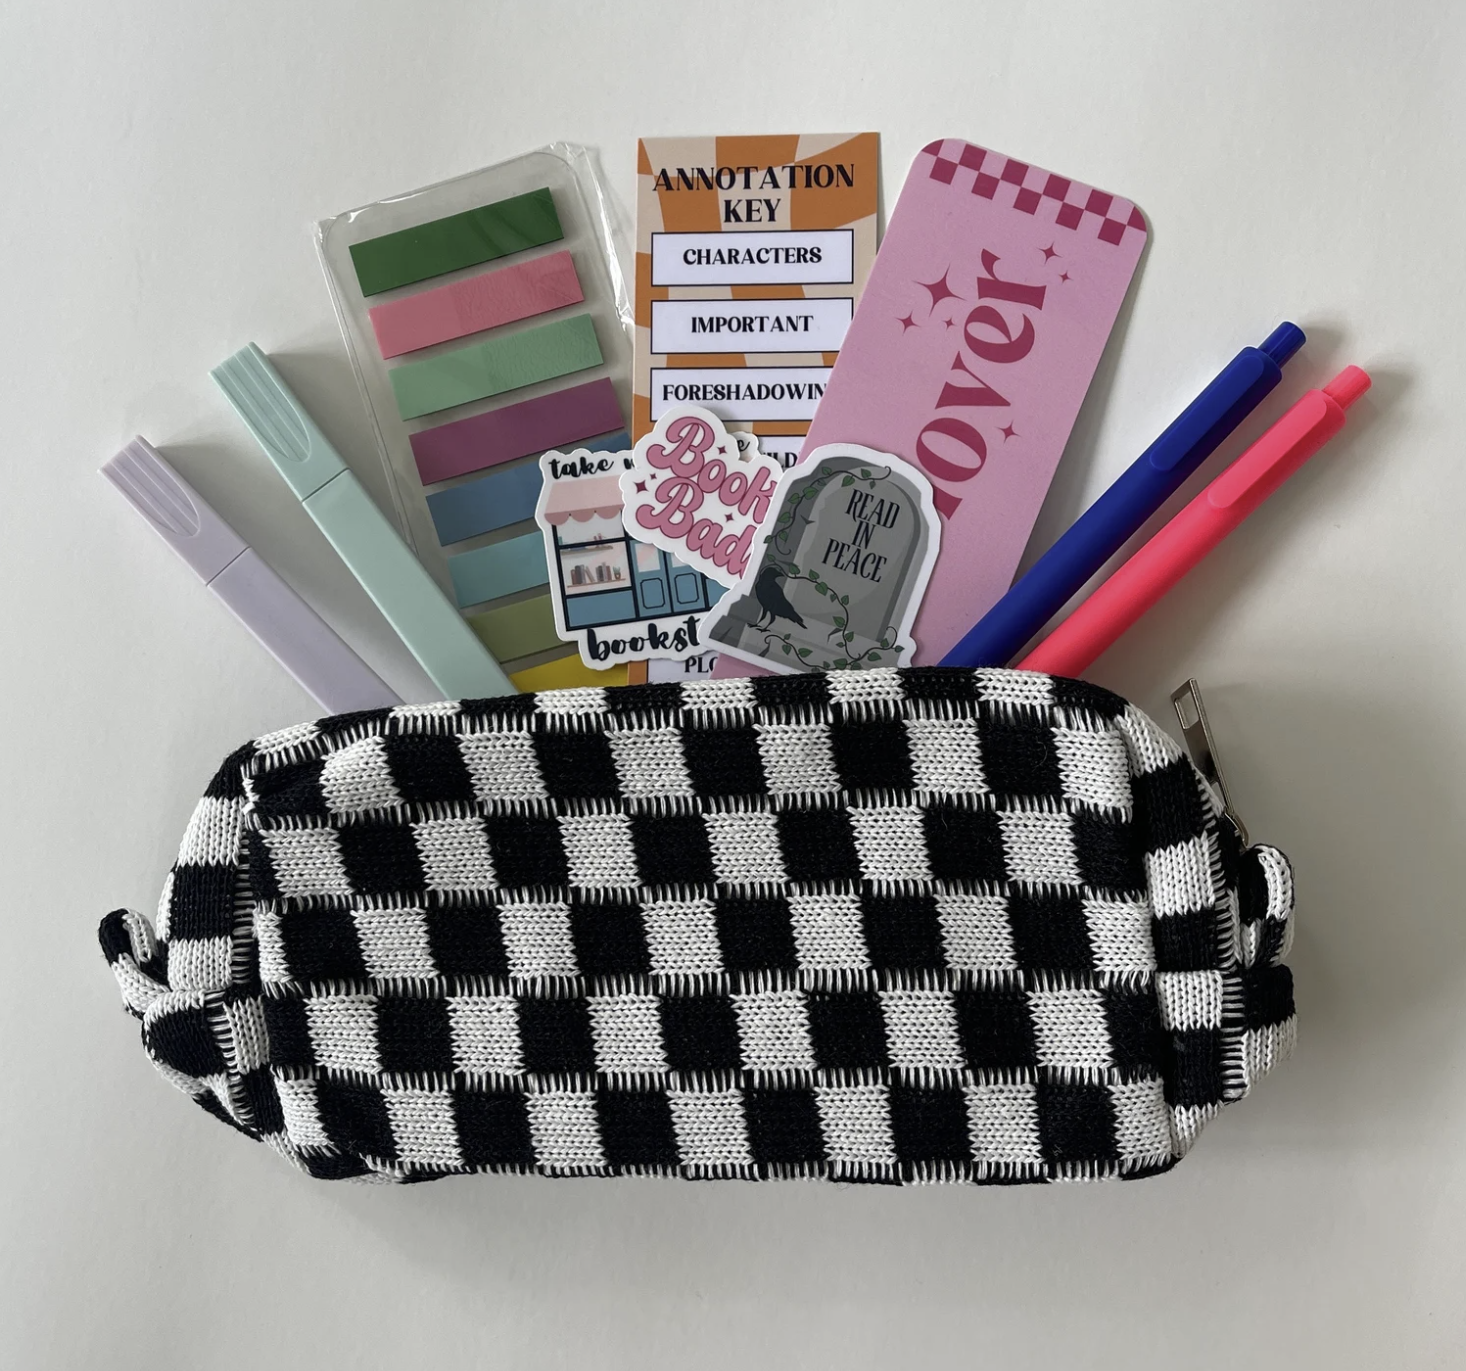 A black and white checkered pouch filled with supplies for book annotation including colored pens and highlighters, sticky note tabs, stickers, and bookmarks fanning out from inside the pouch.